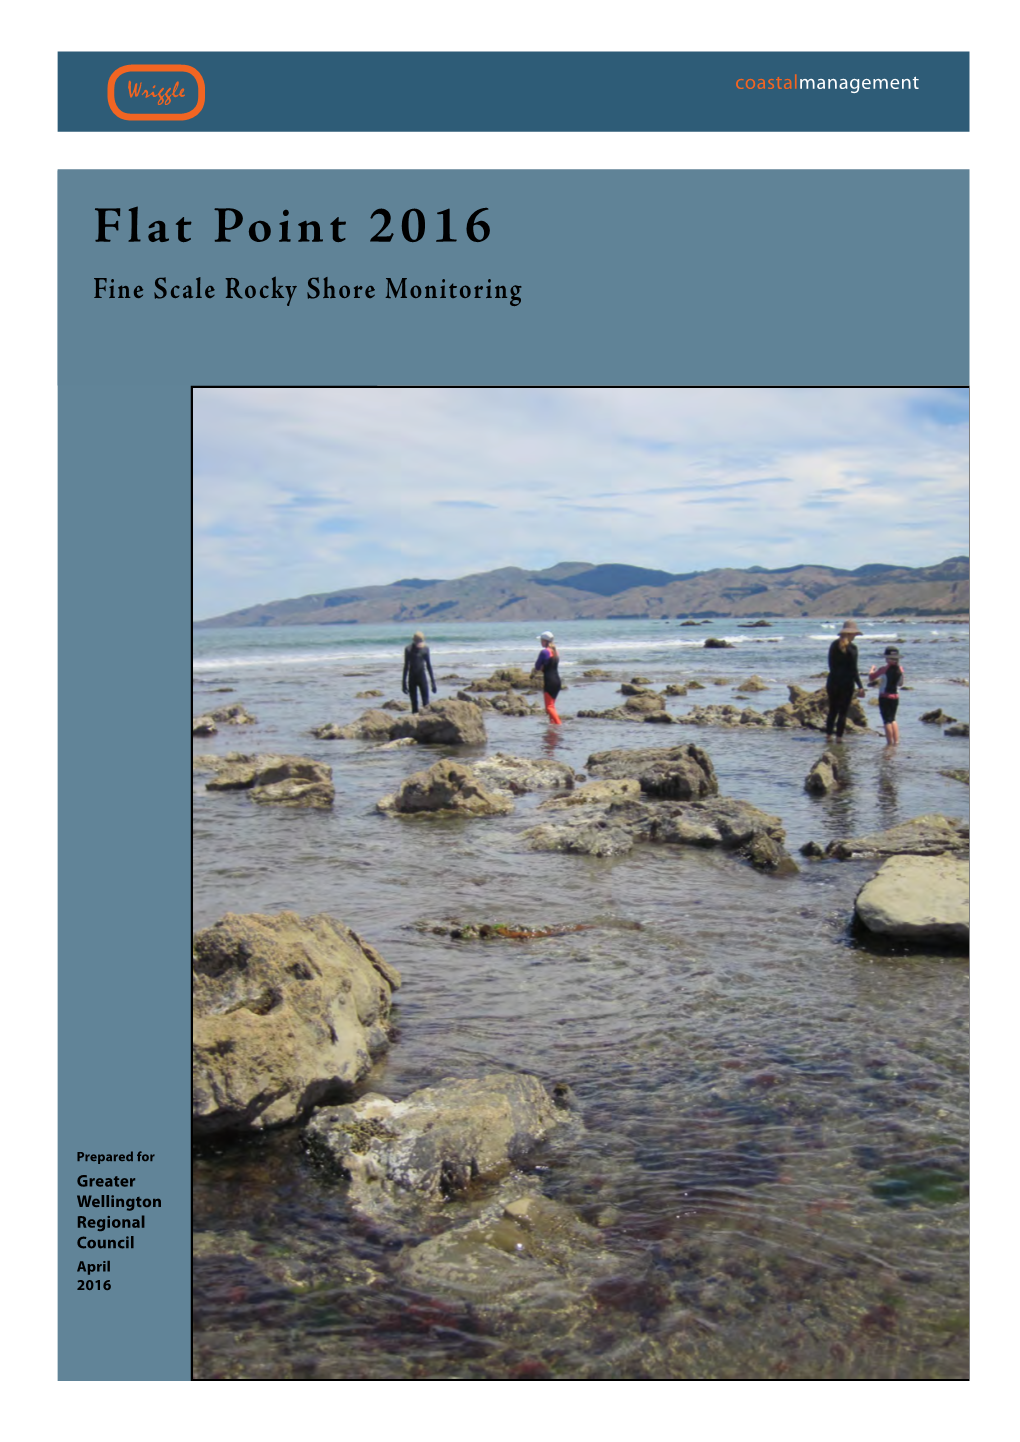 Flat Point 2016 Fine Scale Rocky Shore Monitoring